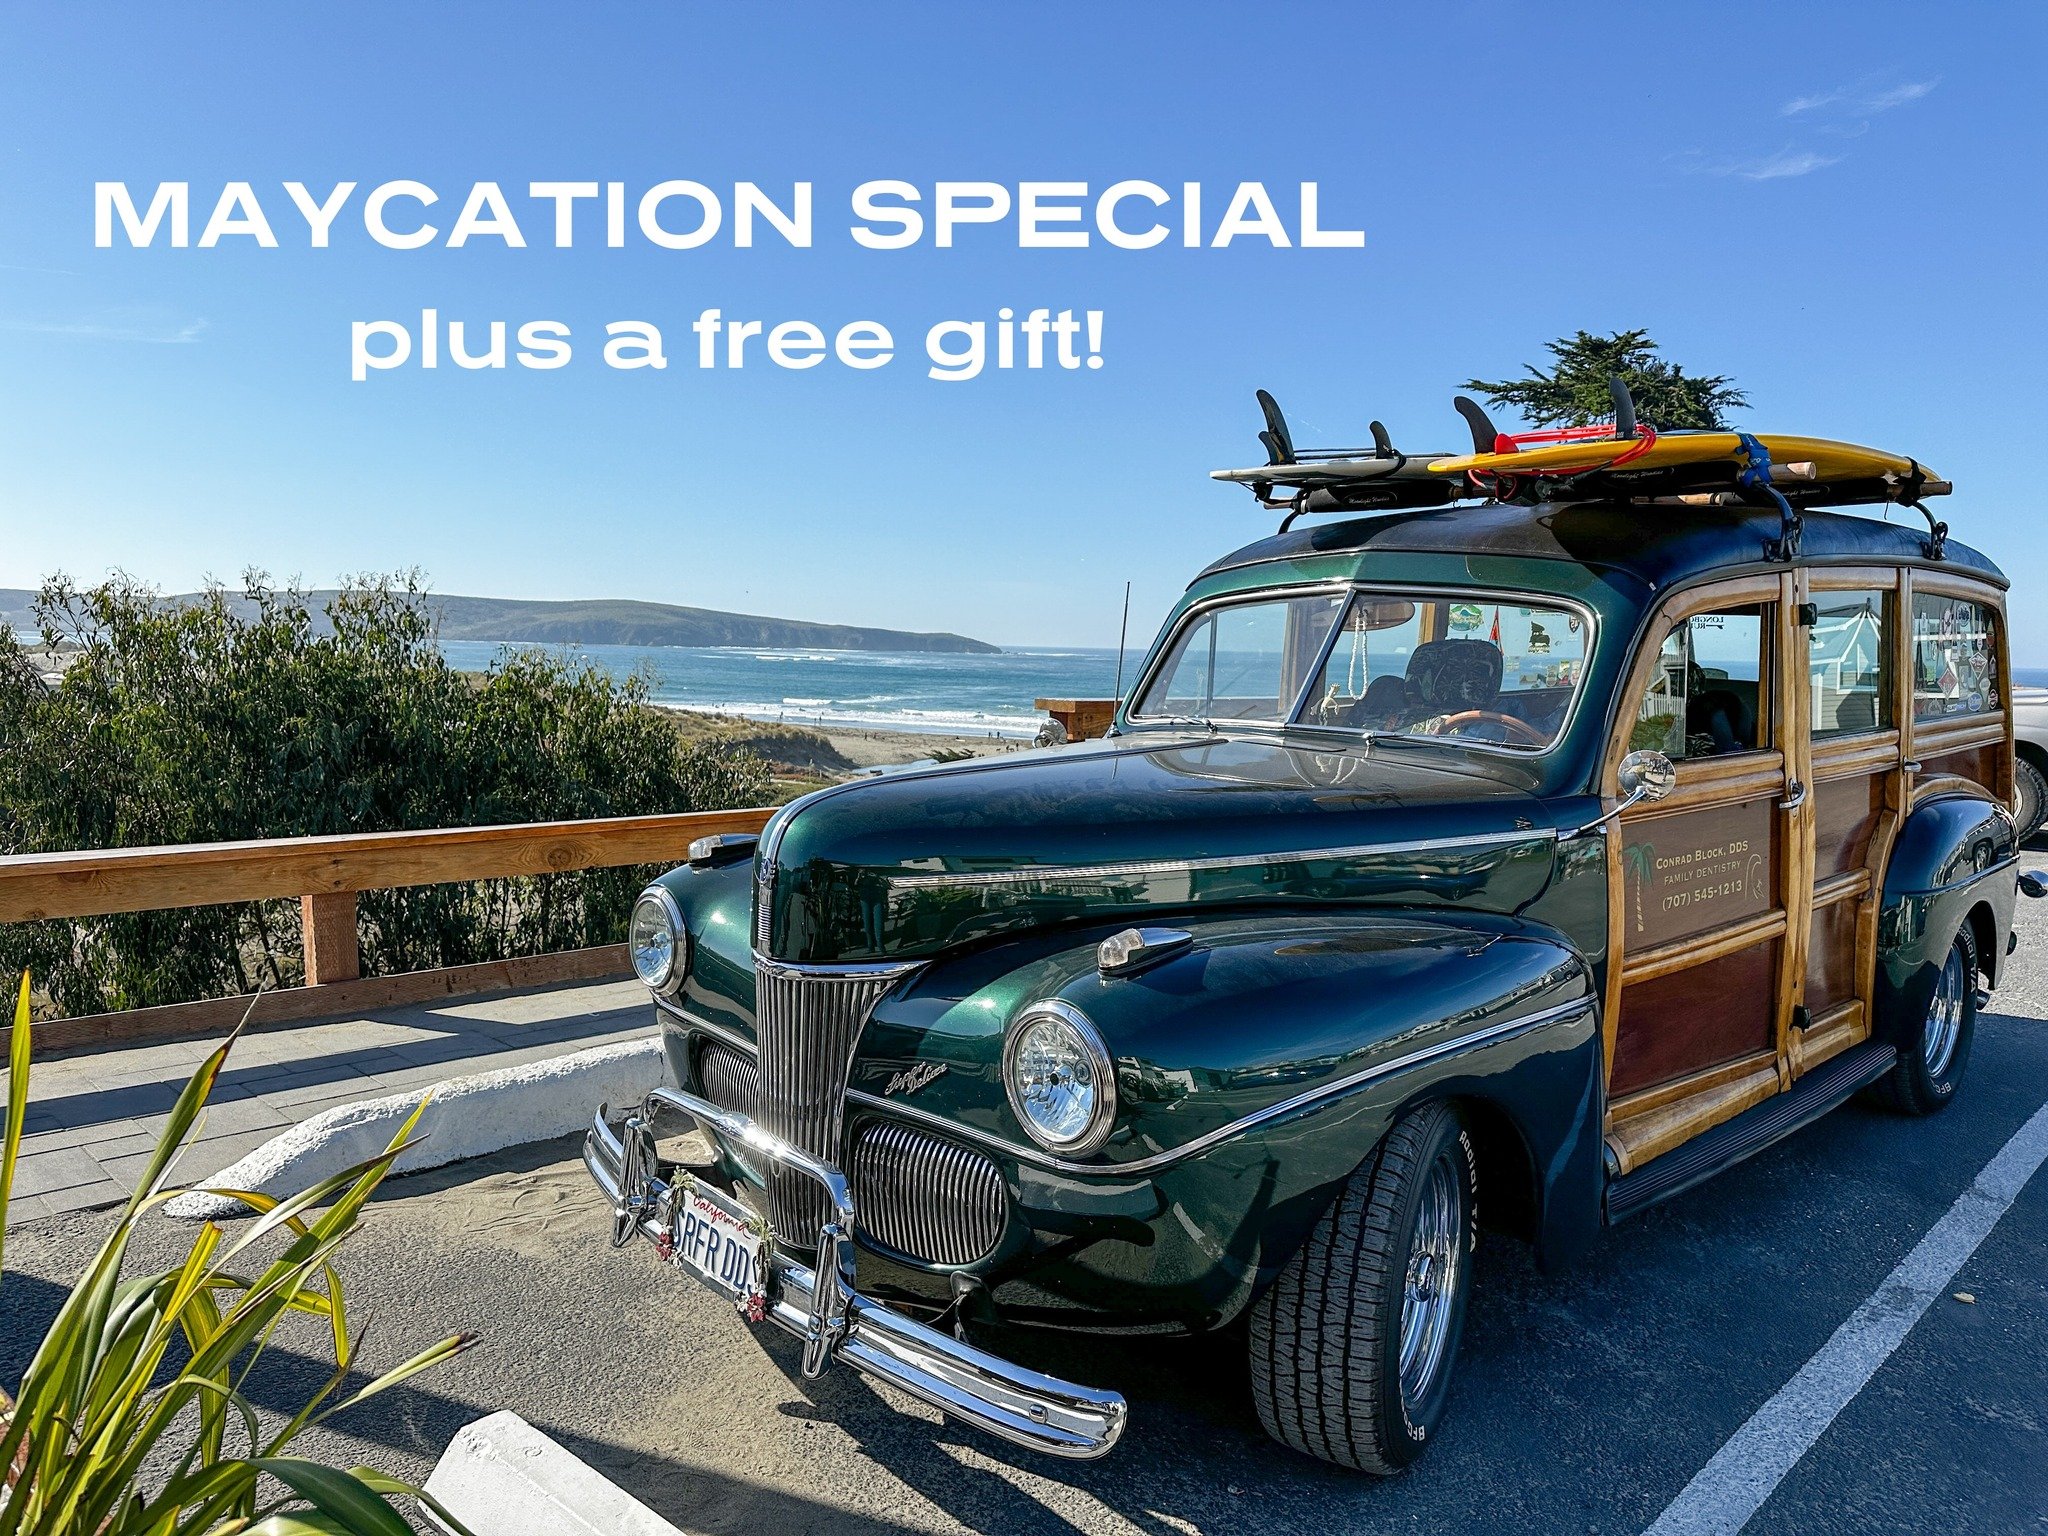 MAYCATION SPECIAL ✨
Come stay with us for 2 or more nights and get 40% OFF your midweek stay! Plus, you receive a gift set completely FREE!** 😱
Use code MAYCATION online at the link in our bio or call us today at (707) 878-3030 x1 to make your reser